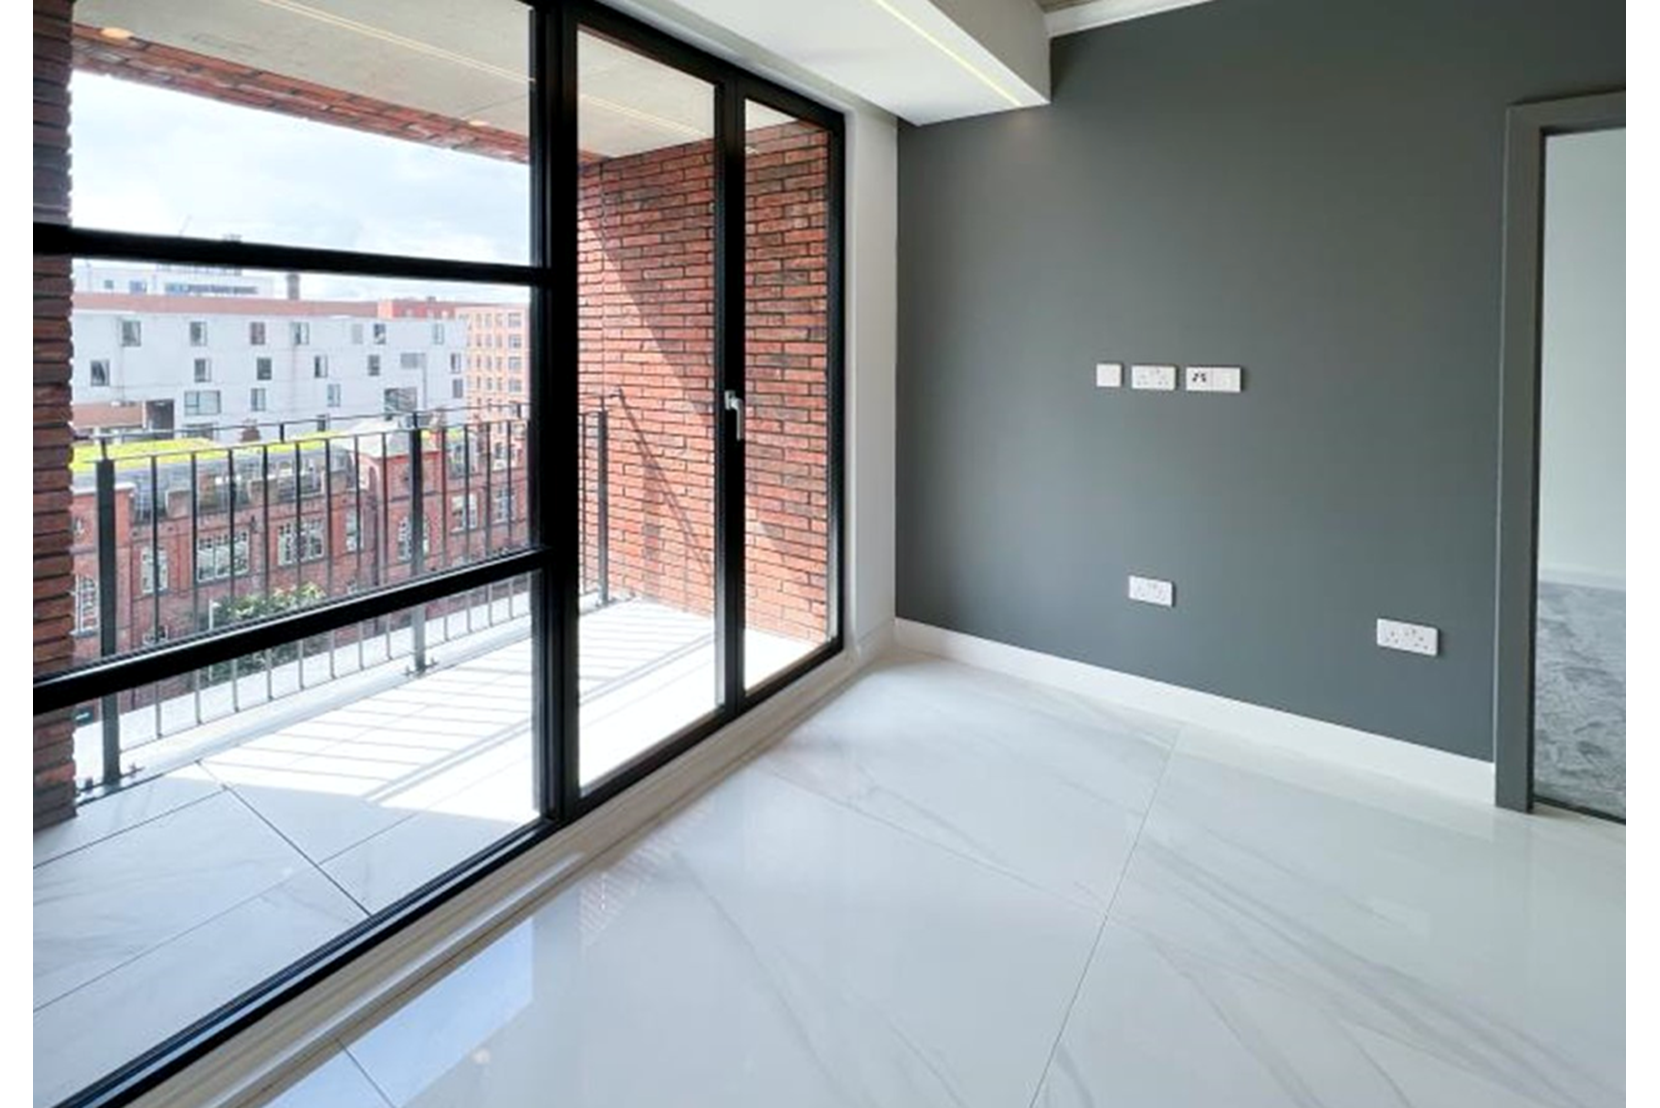 Apartments to Rent by Northern Group at One Silk Street, Manchester, M4, private balcony